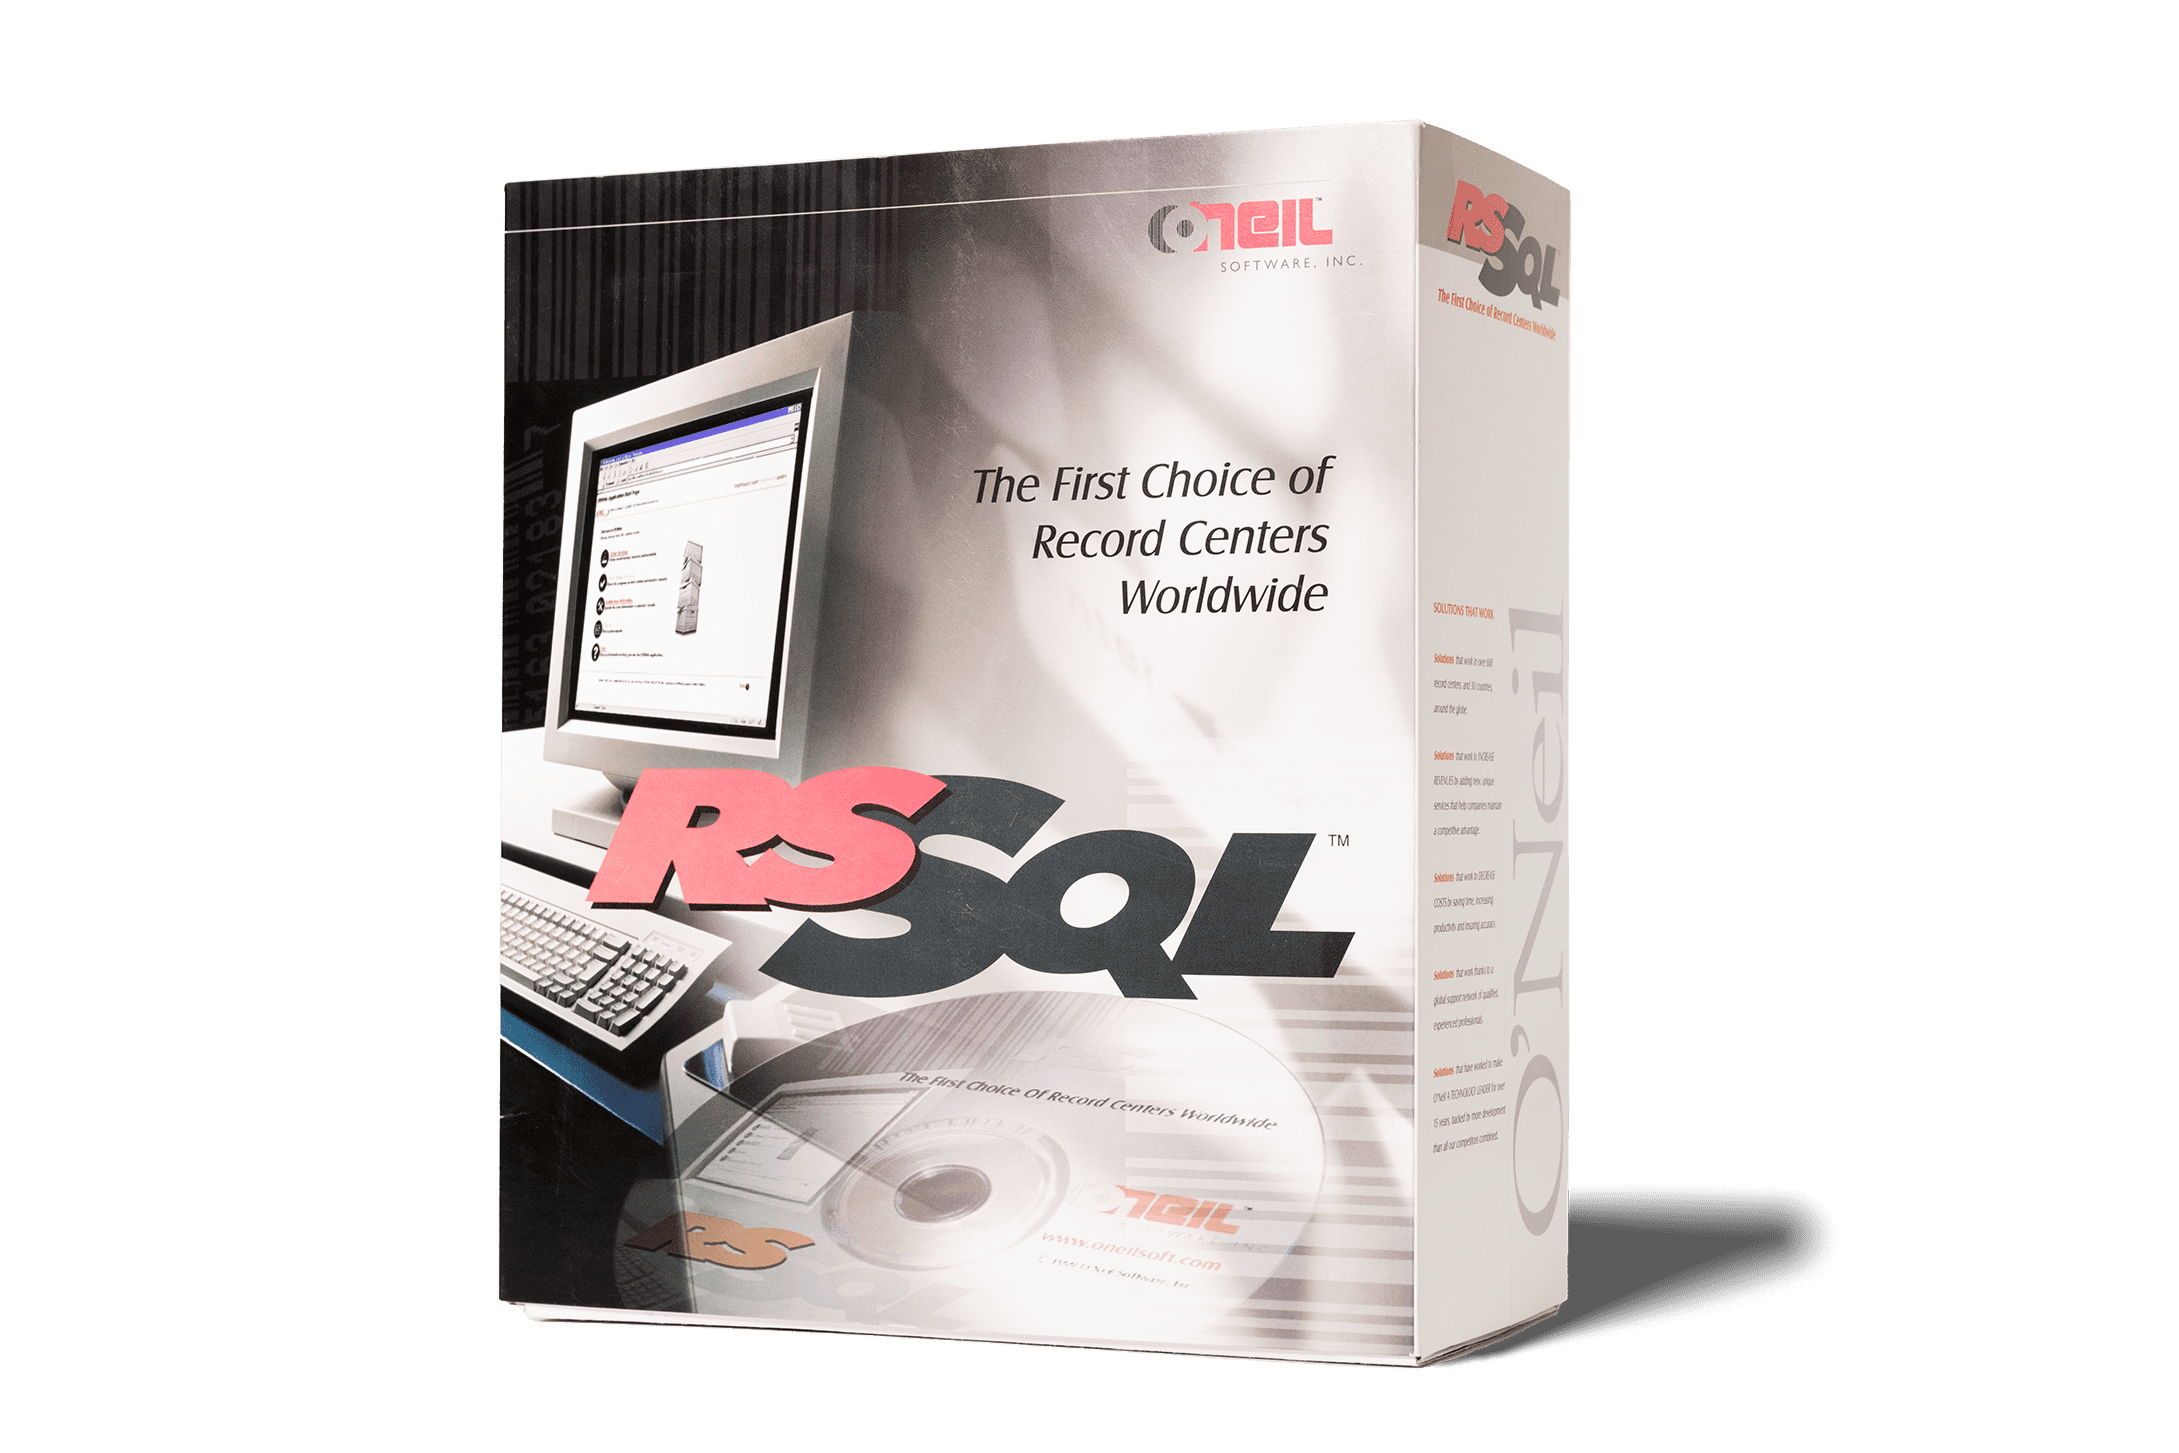 A box containing the RS-SQL records management software designed by O'Neil Software.  